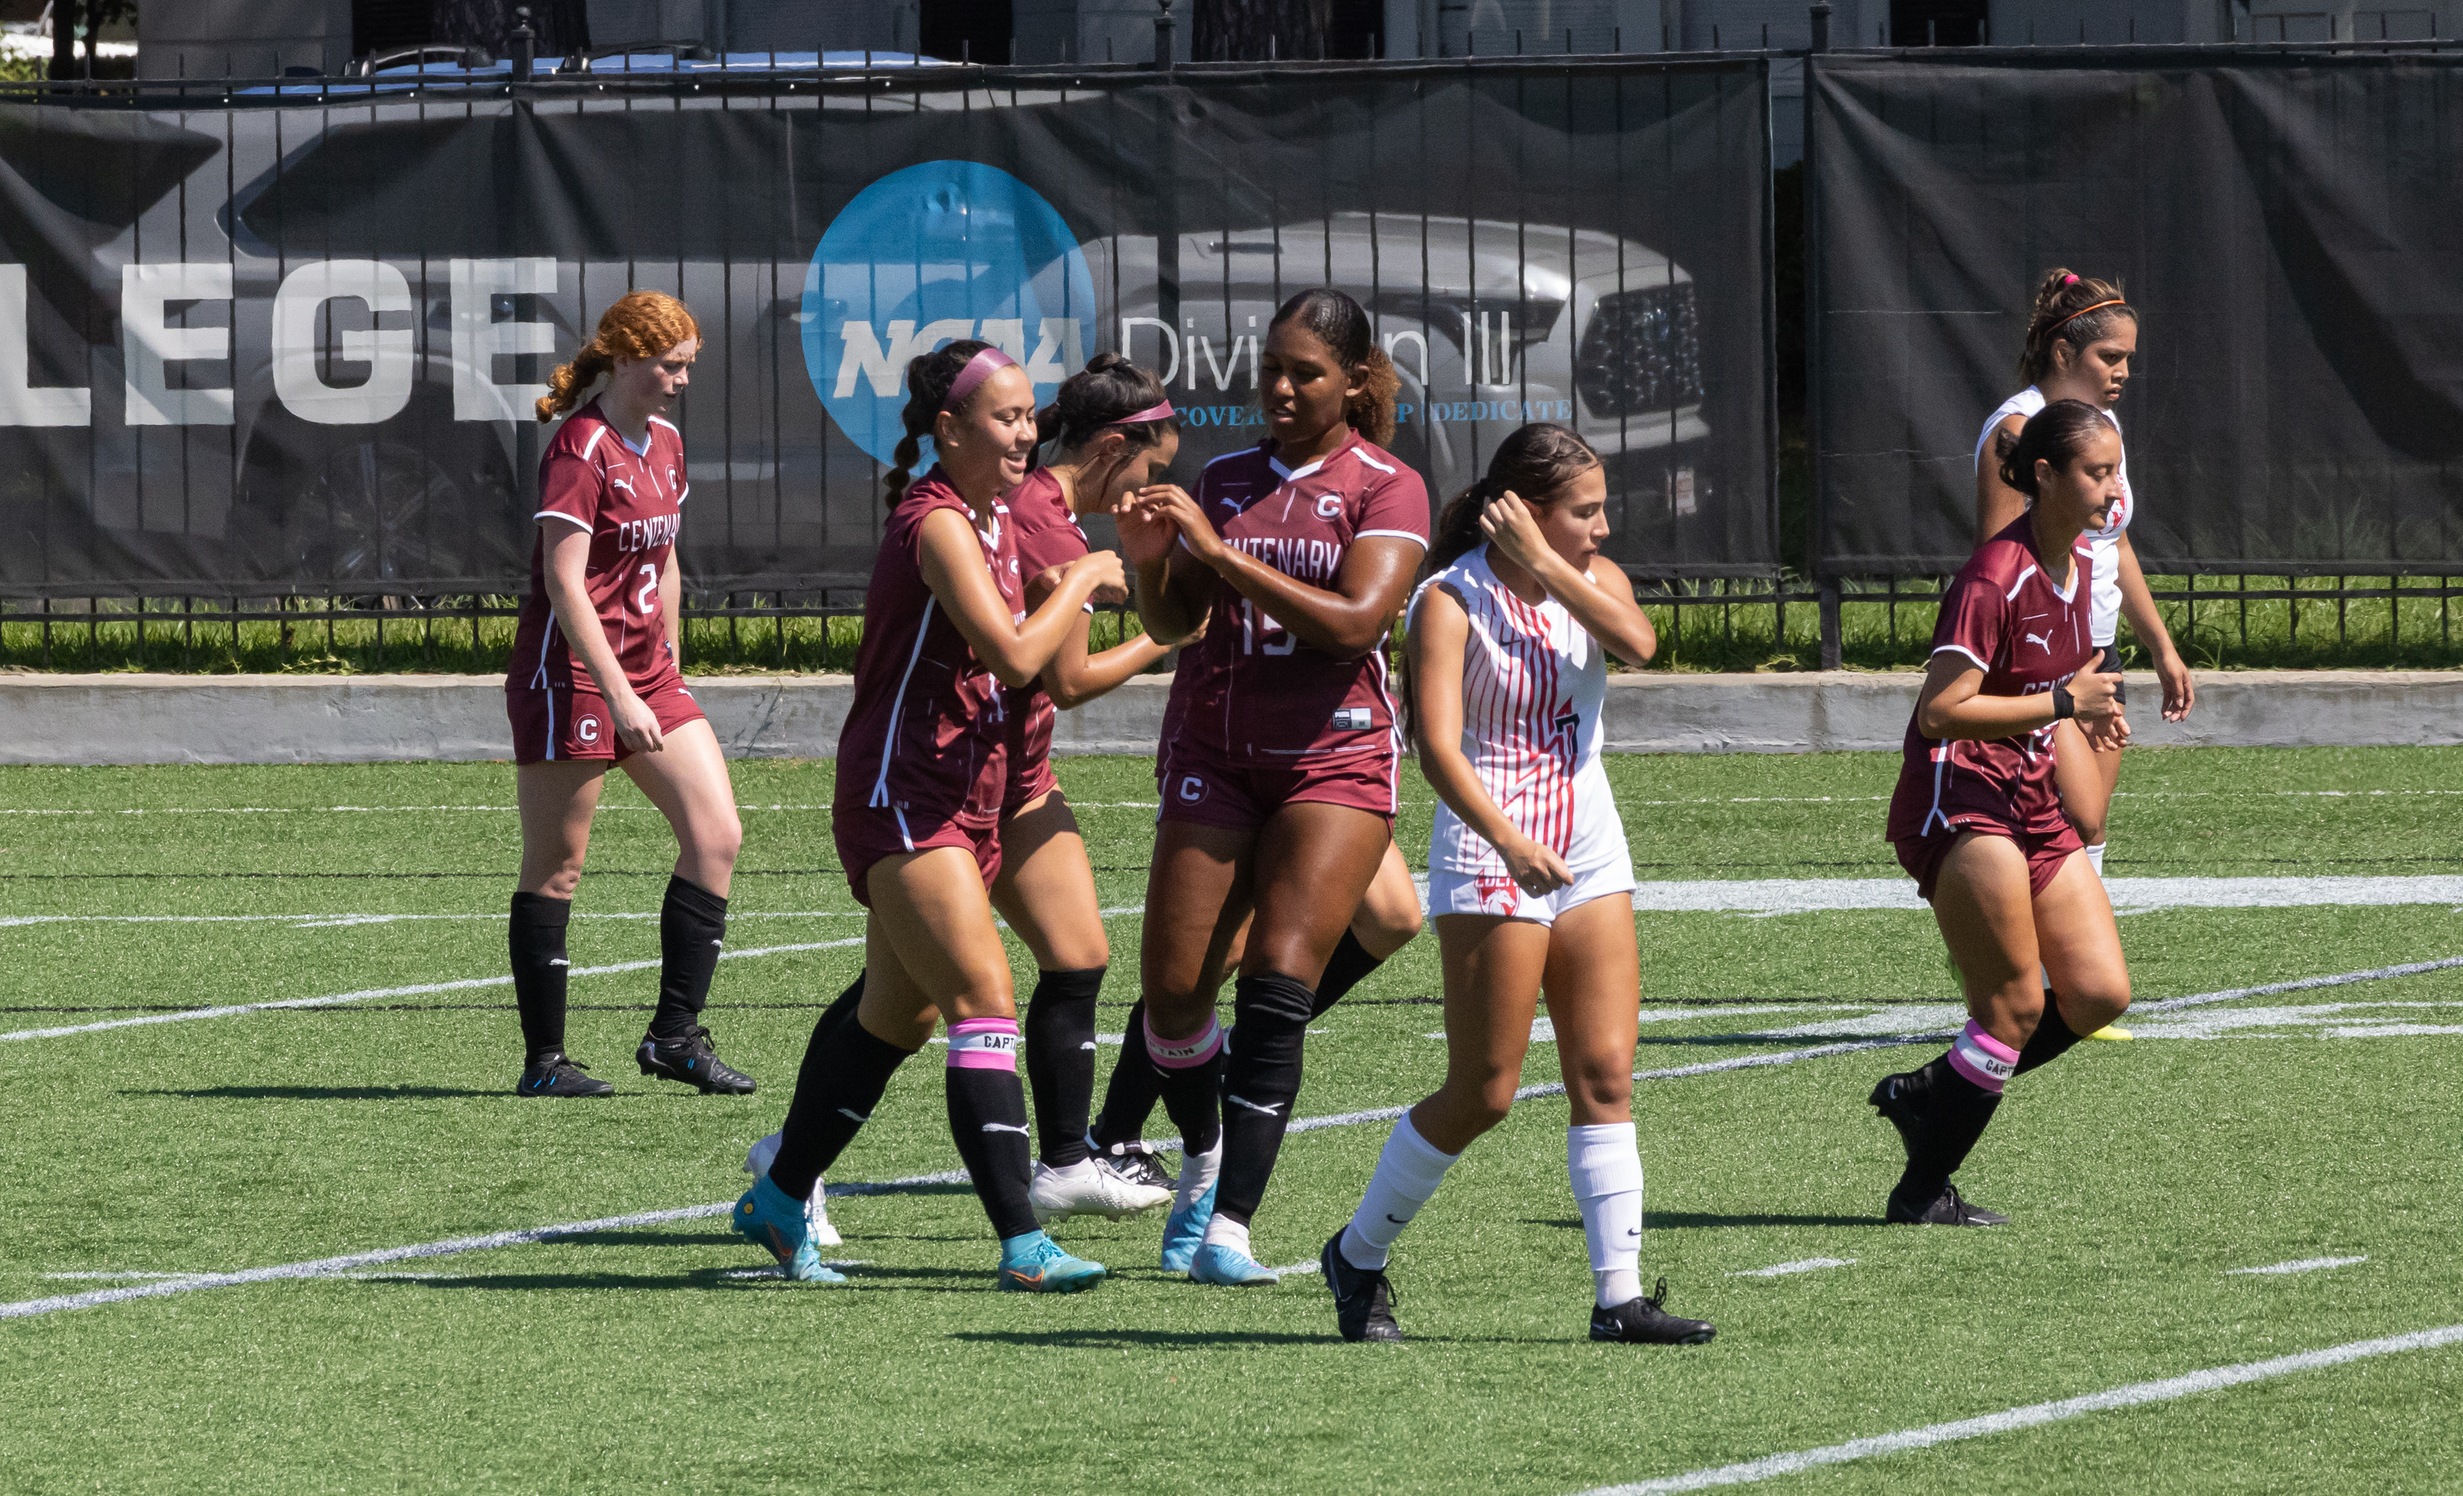 The Ladies fell 2-0 at Schreiner on Friday in Kerrville, Texas.